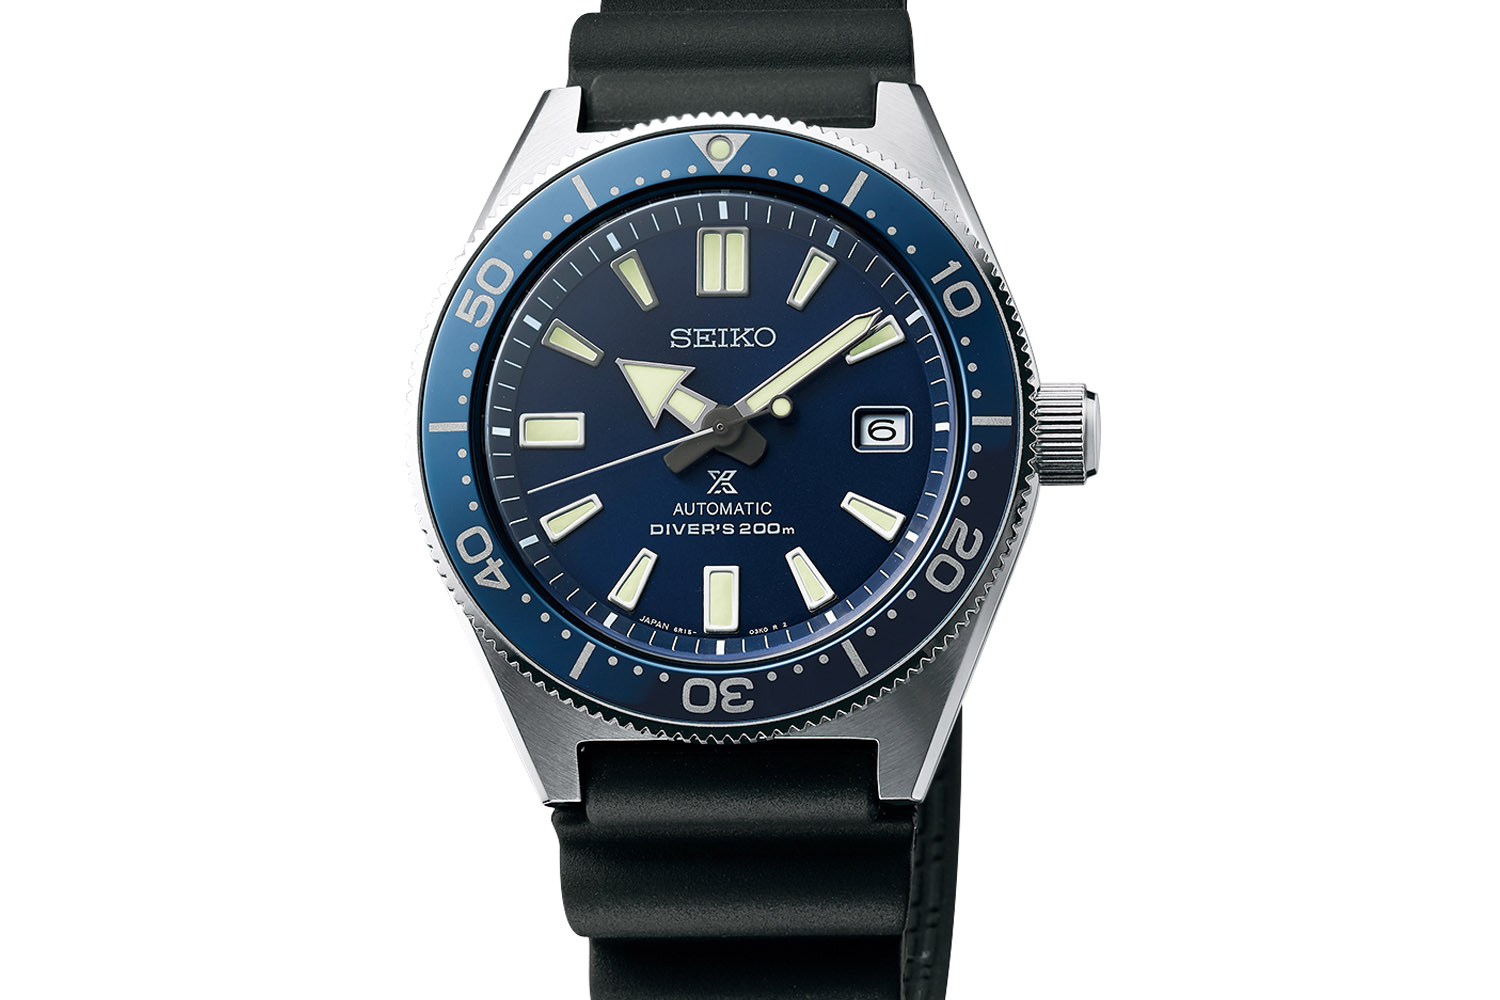 My Eastern Watch Collection: SEIKO Prospex 200M Diver Automatic SBDC053  (SPB053) – A Dress Diving Watch, A Review (plus Video)